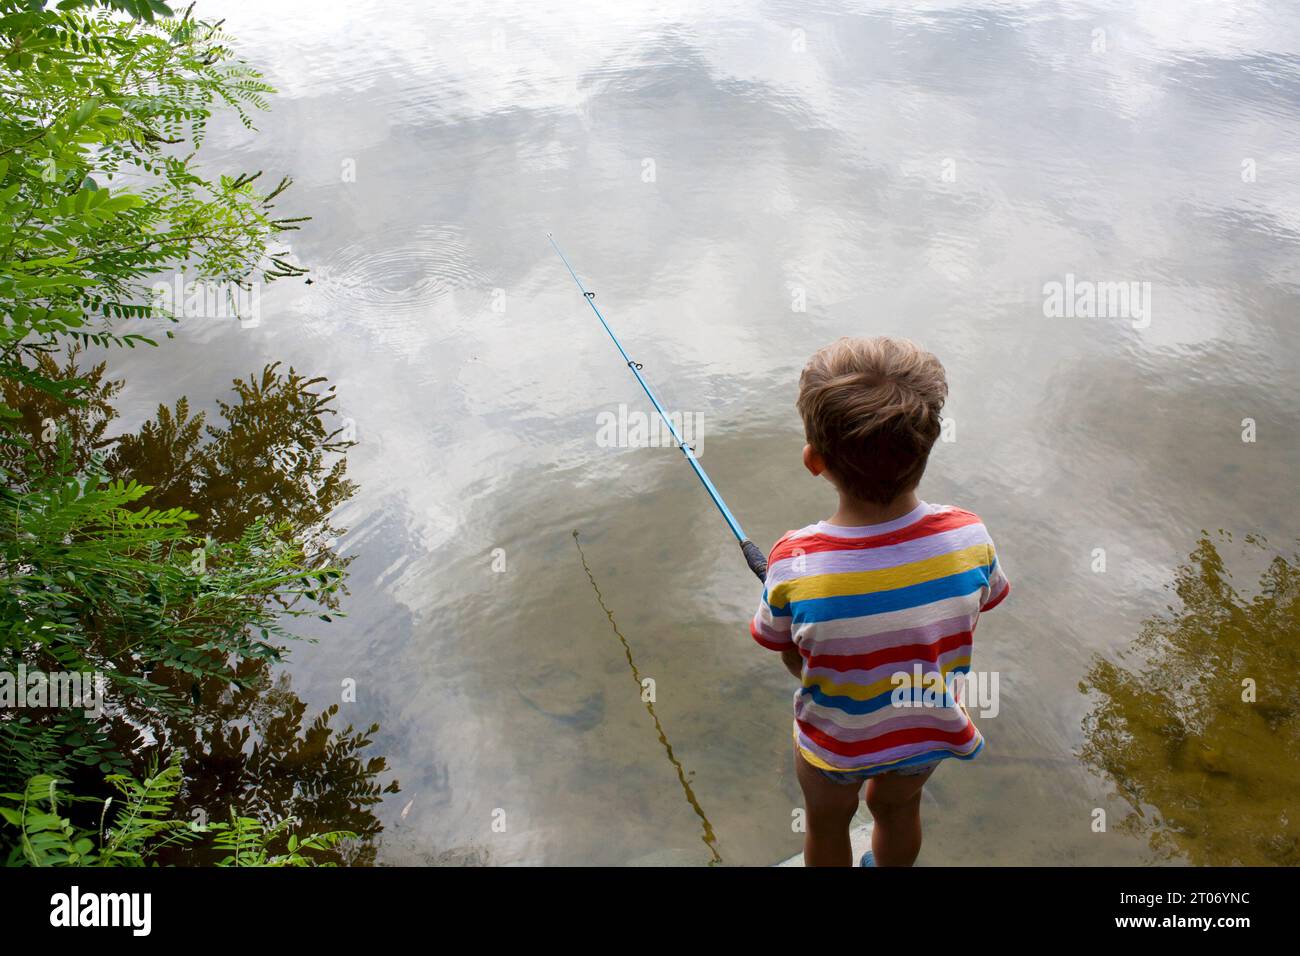 preschool child is fishing in river on cloudy summer day. boy threw fishing rod, stands with his back to camera, clouds are reflected in river. Nature Stock Photo